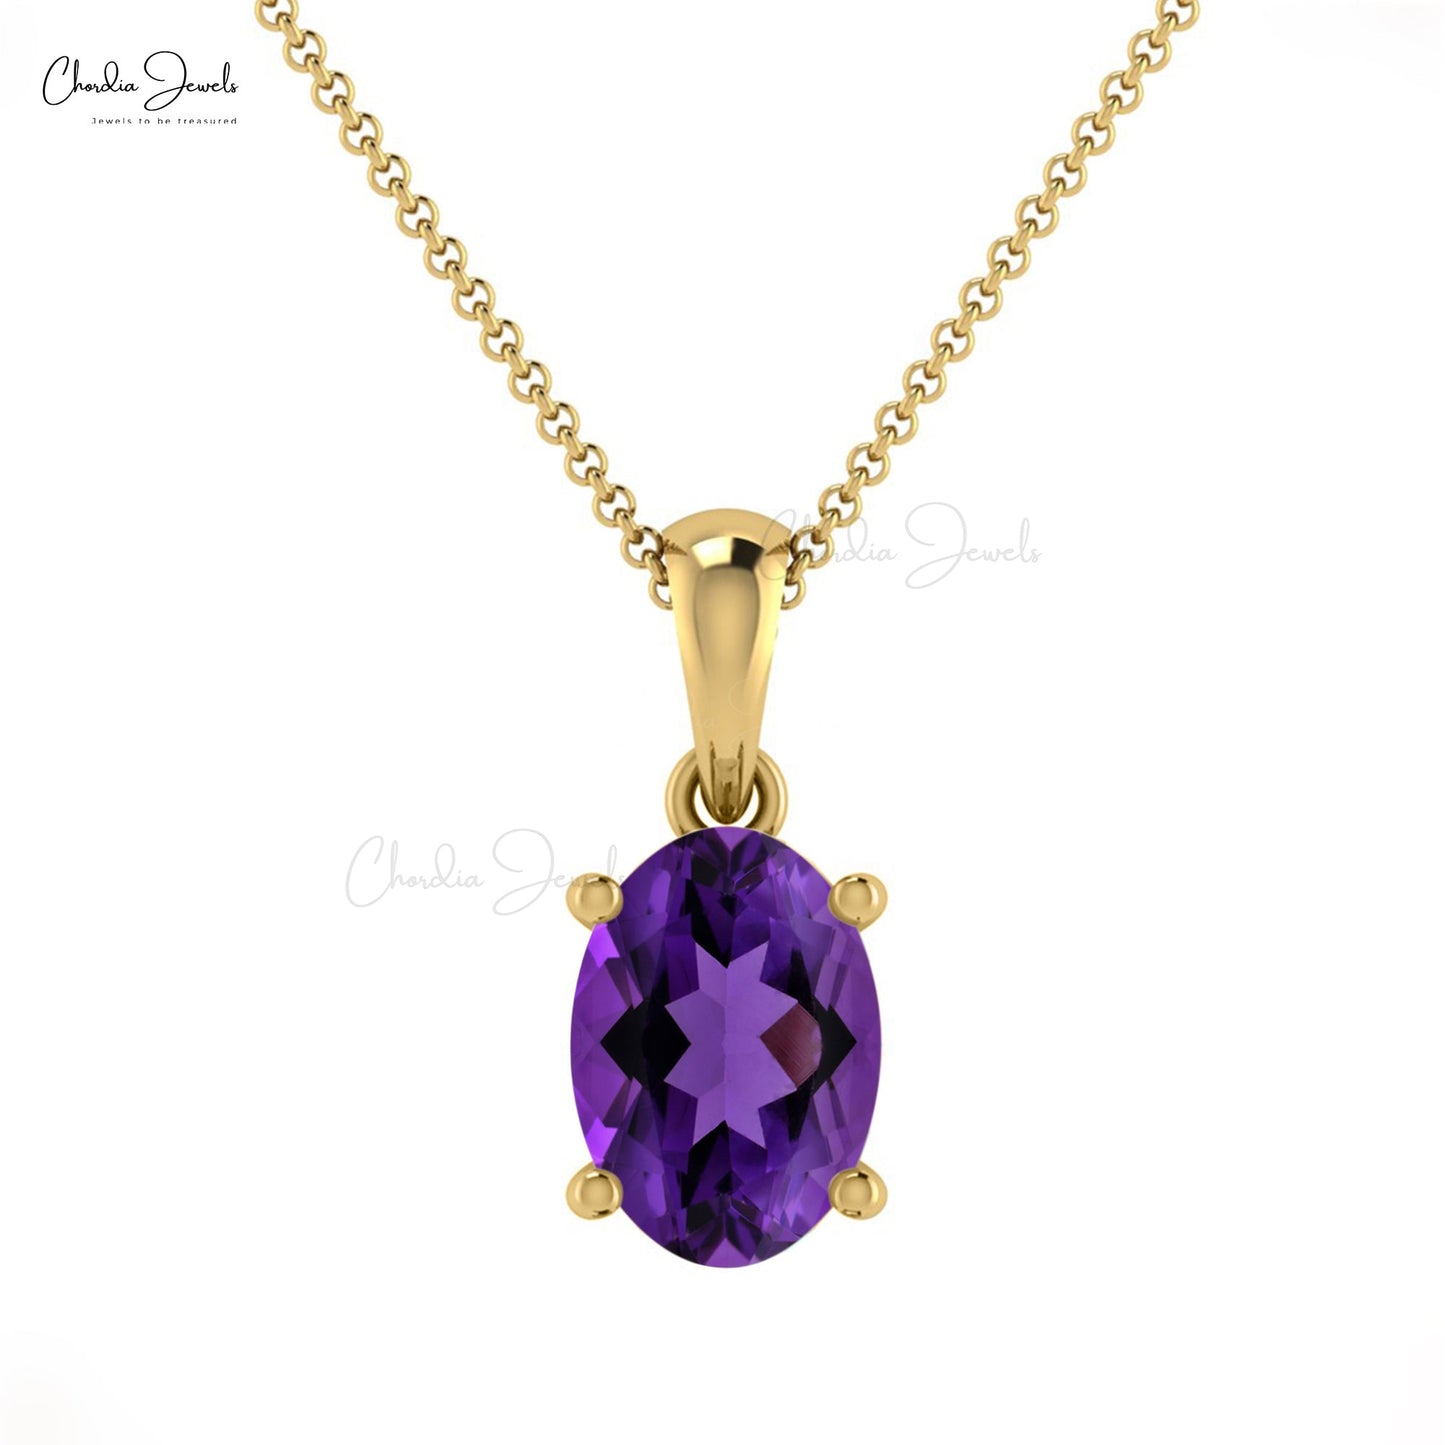 Natural Amethyst Pendant, 14k Solid Gold Prong Set Pendant, 7x5mm Oval Faceted Gemstone Handmade Pendant Gift for Women